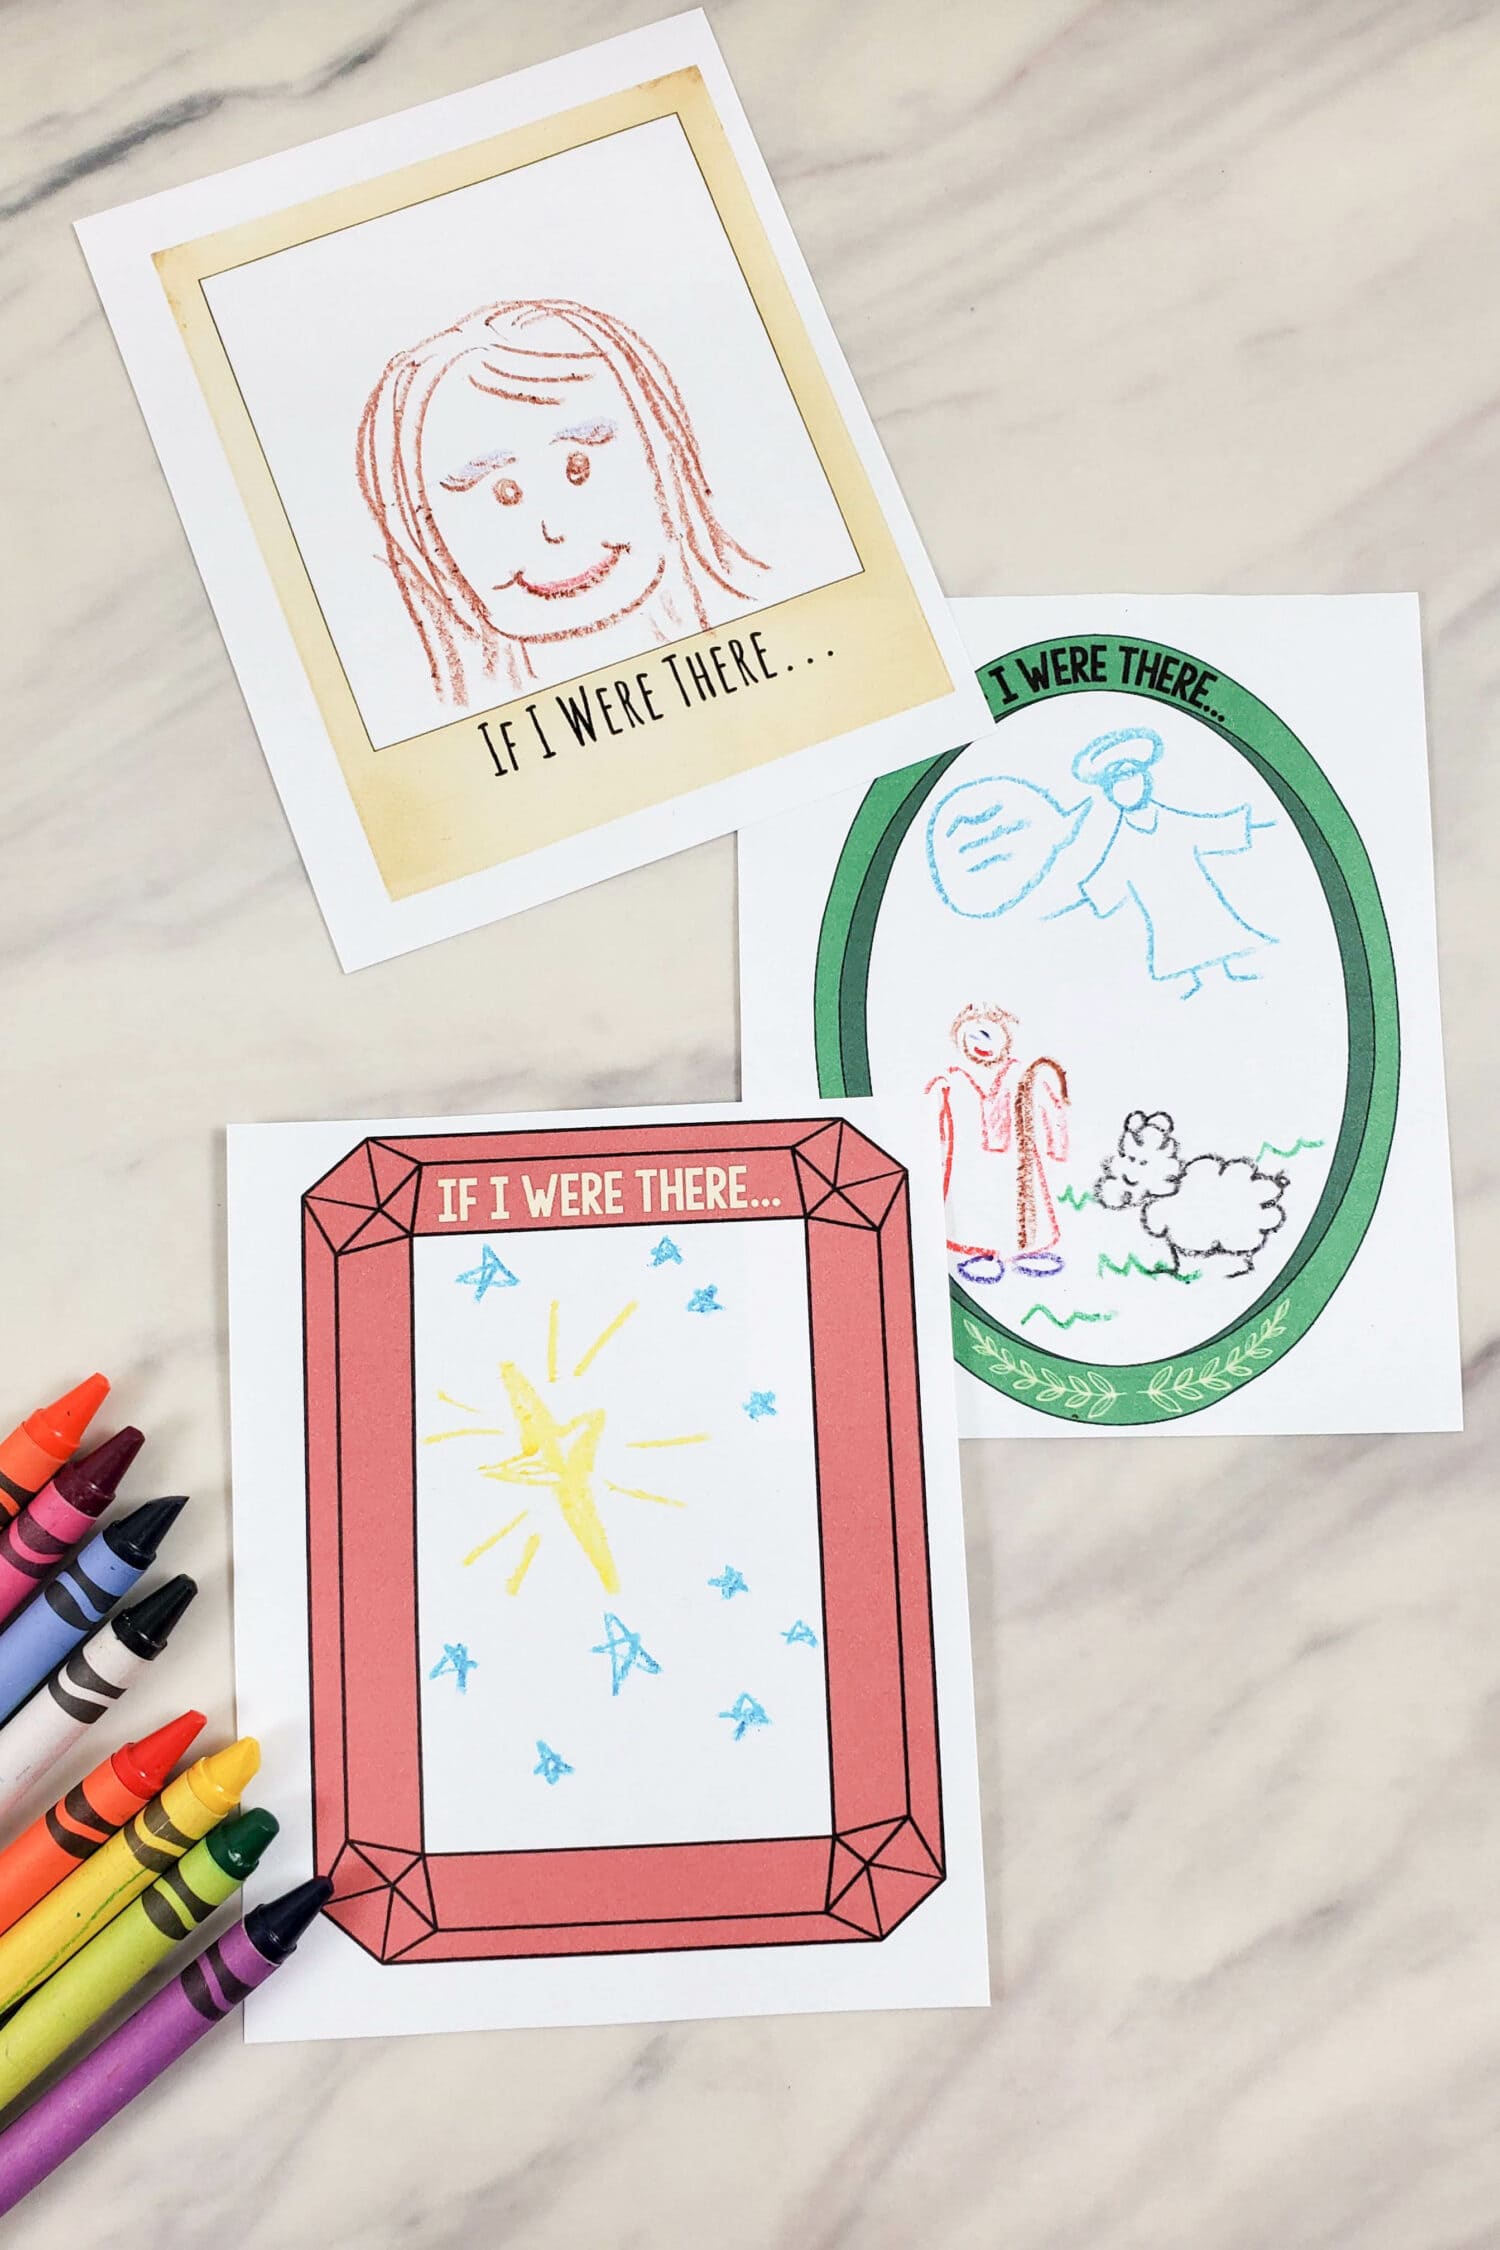 If I Were There Picture Me There singing time idea for this beautiful new Christmas song for Primary by Angie Killian! Have the kids color in what they would do if THEY were there!! Printable song helps for LDS Primary music Leaders.